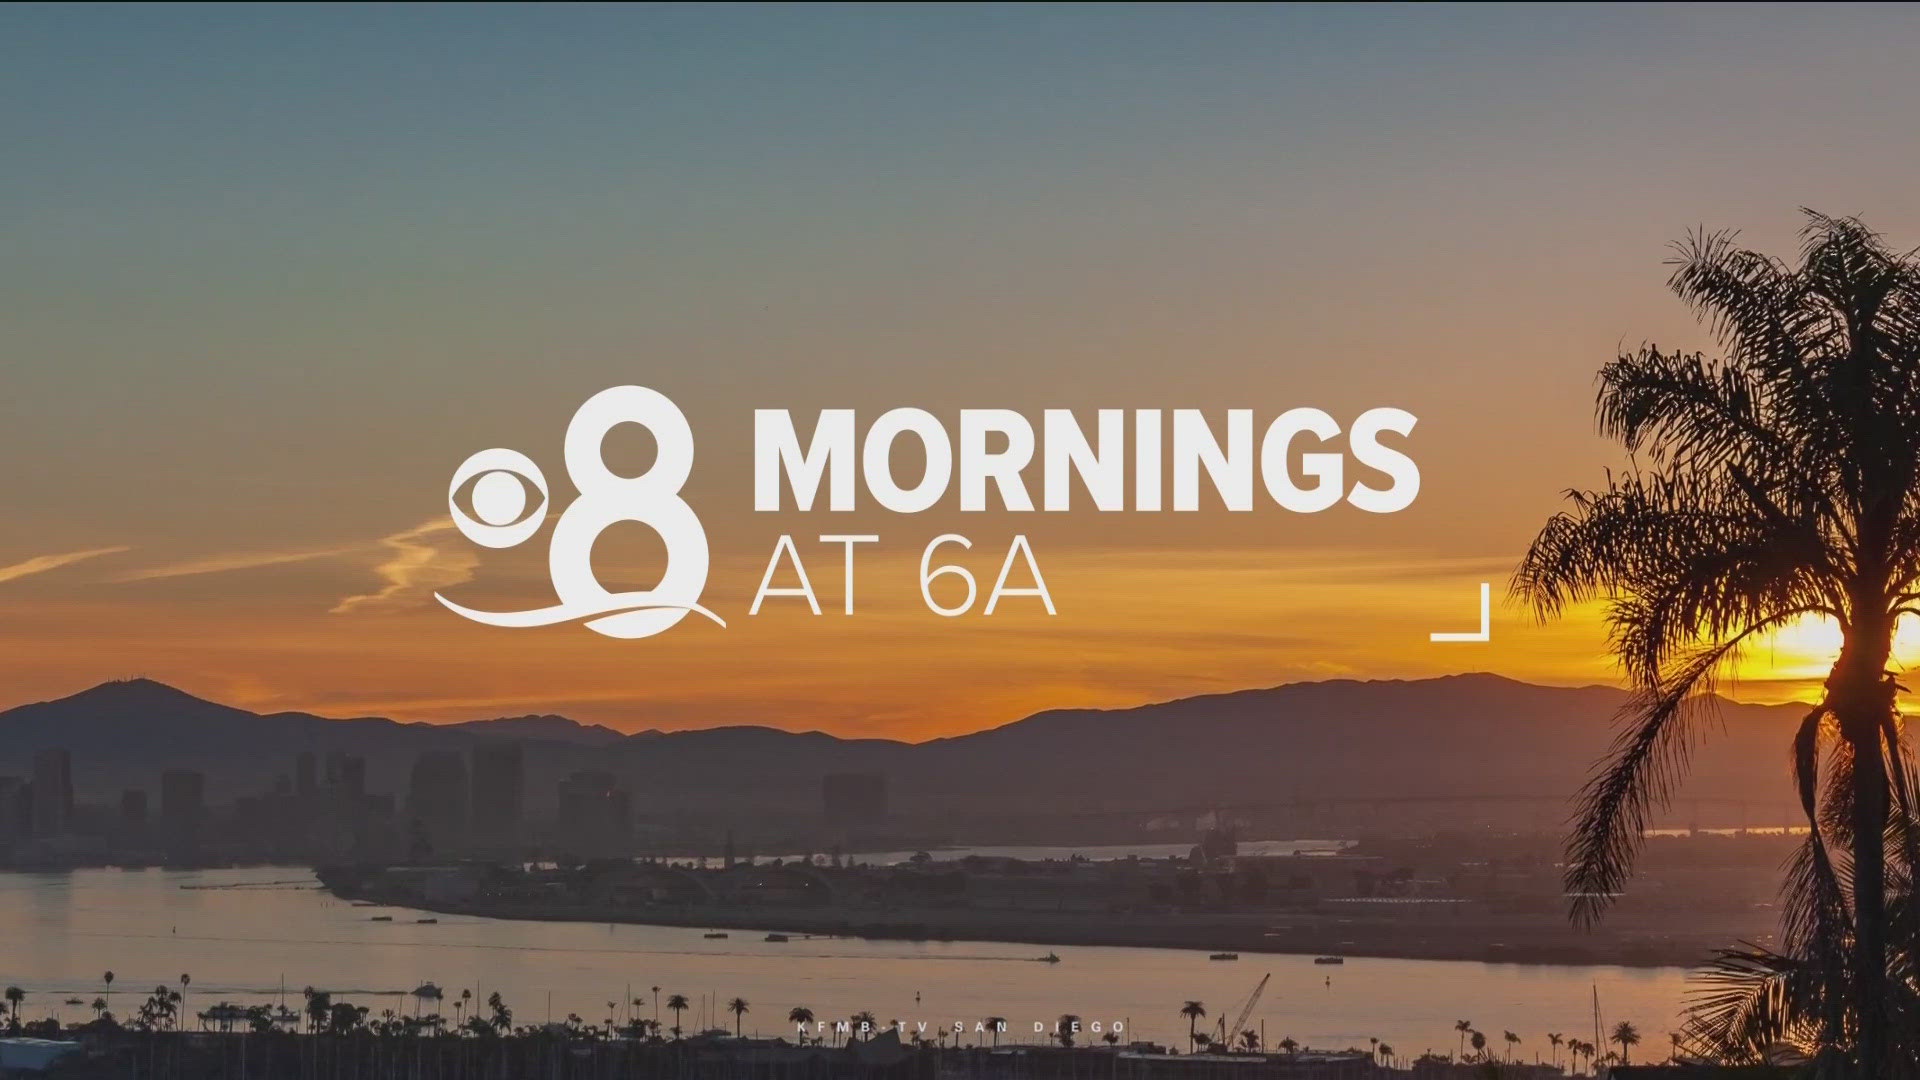 Here are the top stories around San Diego County for the morning of Tuesday, May 14th.
For the latest news, weather and sports, head to:
https://www.cbs8.com/